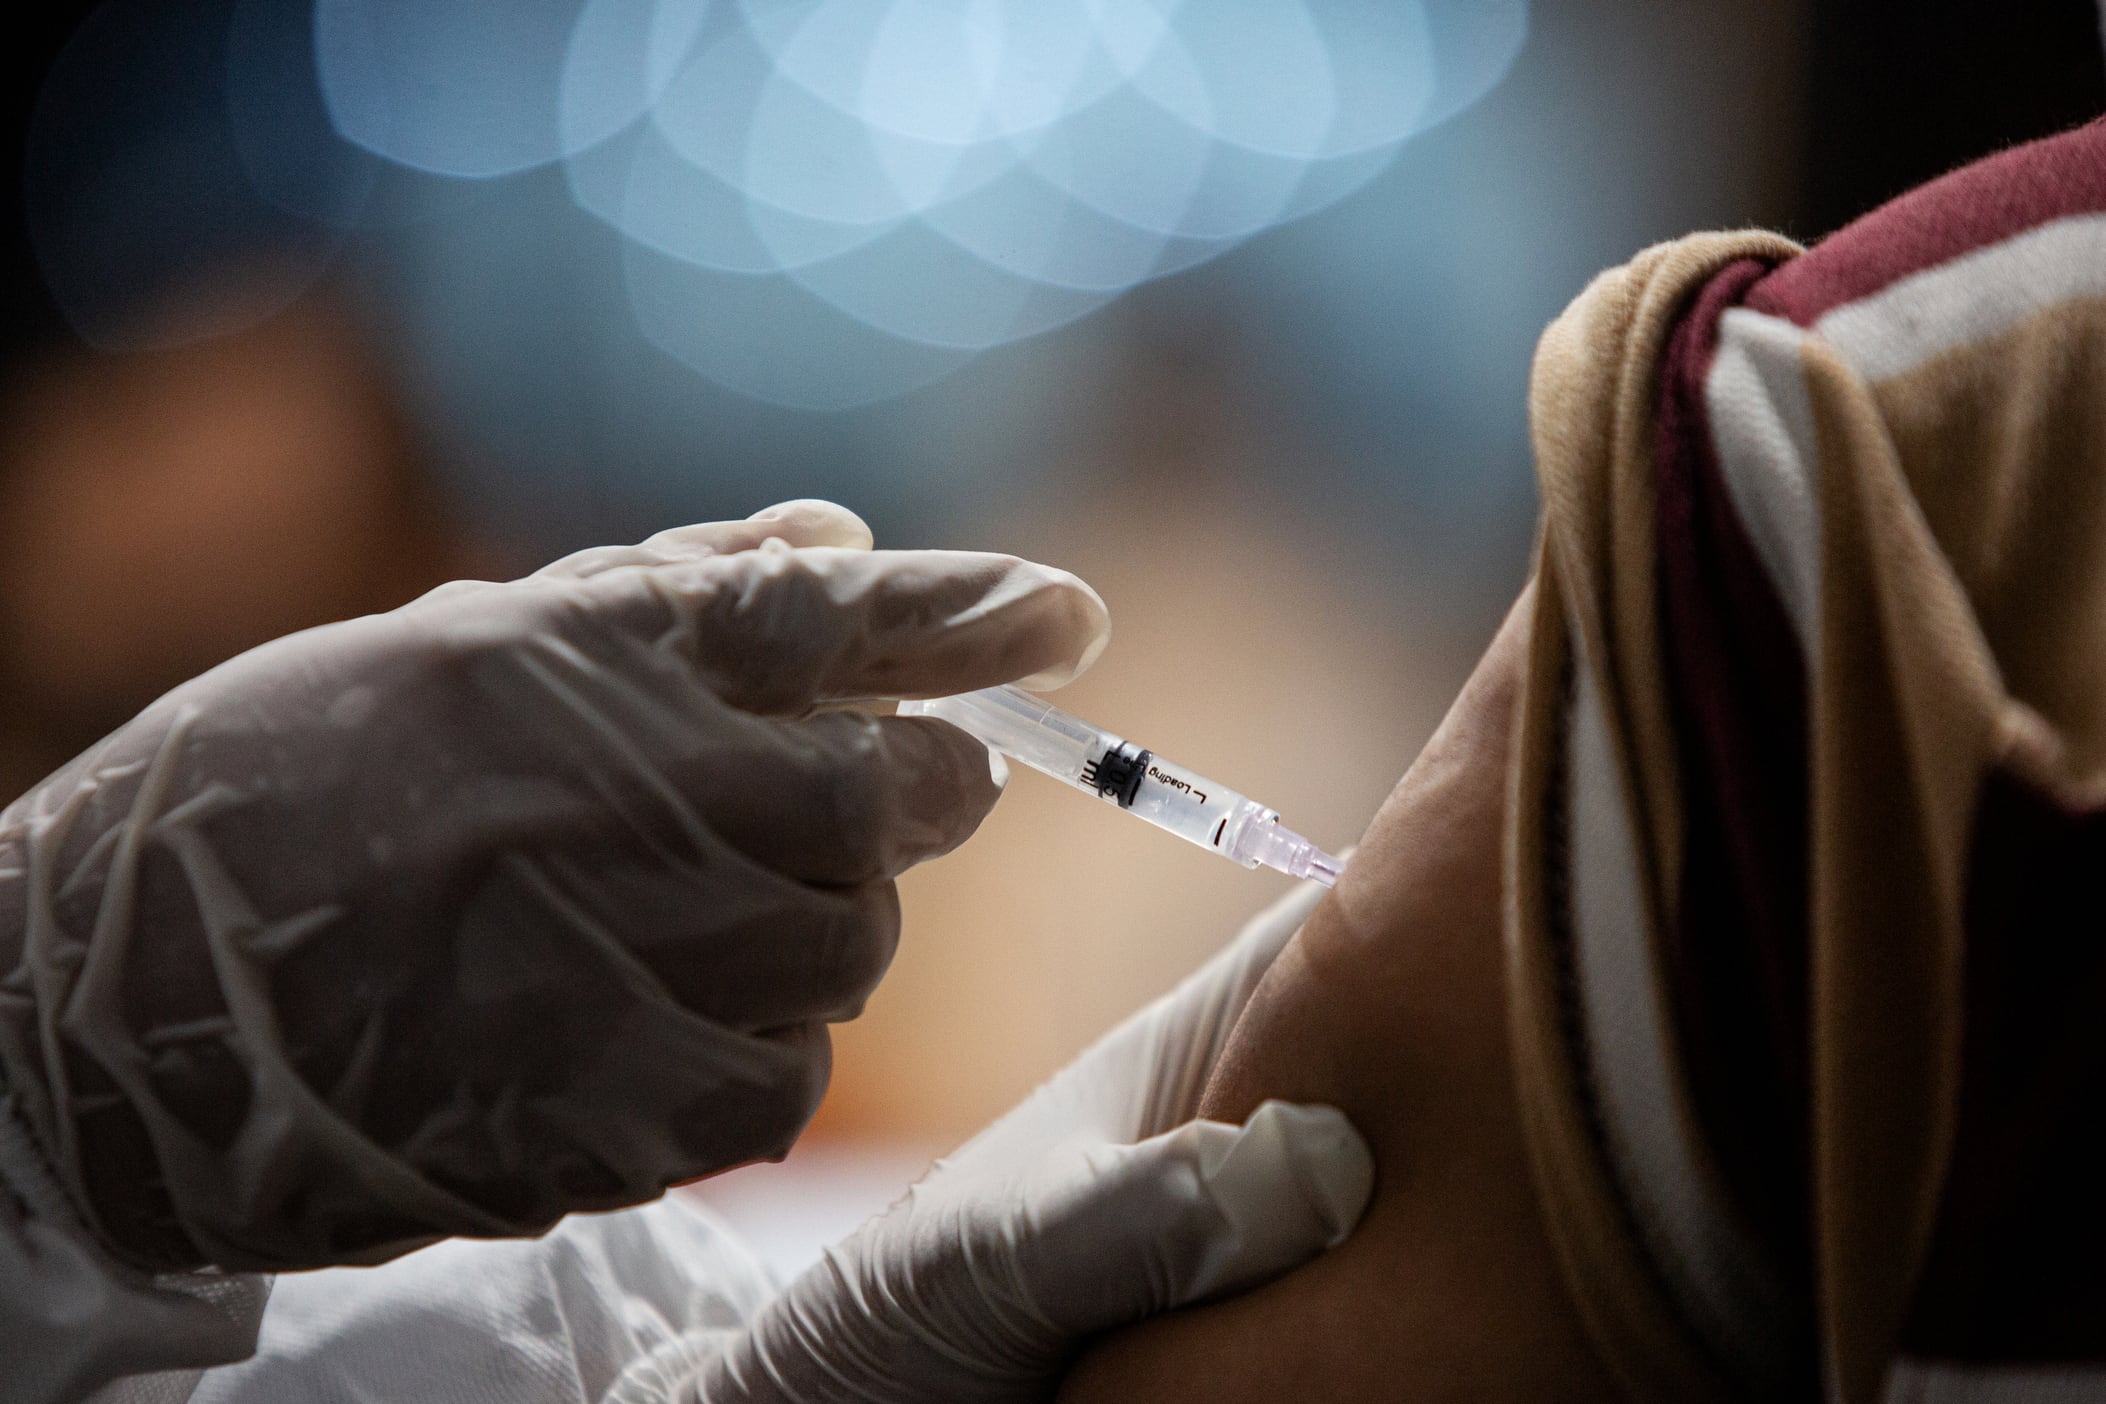 A health care professional wearing latex gloves injects a dose of the COVID vaccine into a person’s arm.